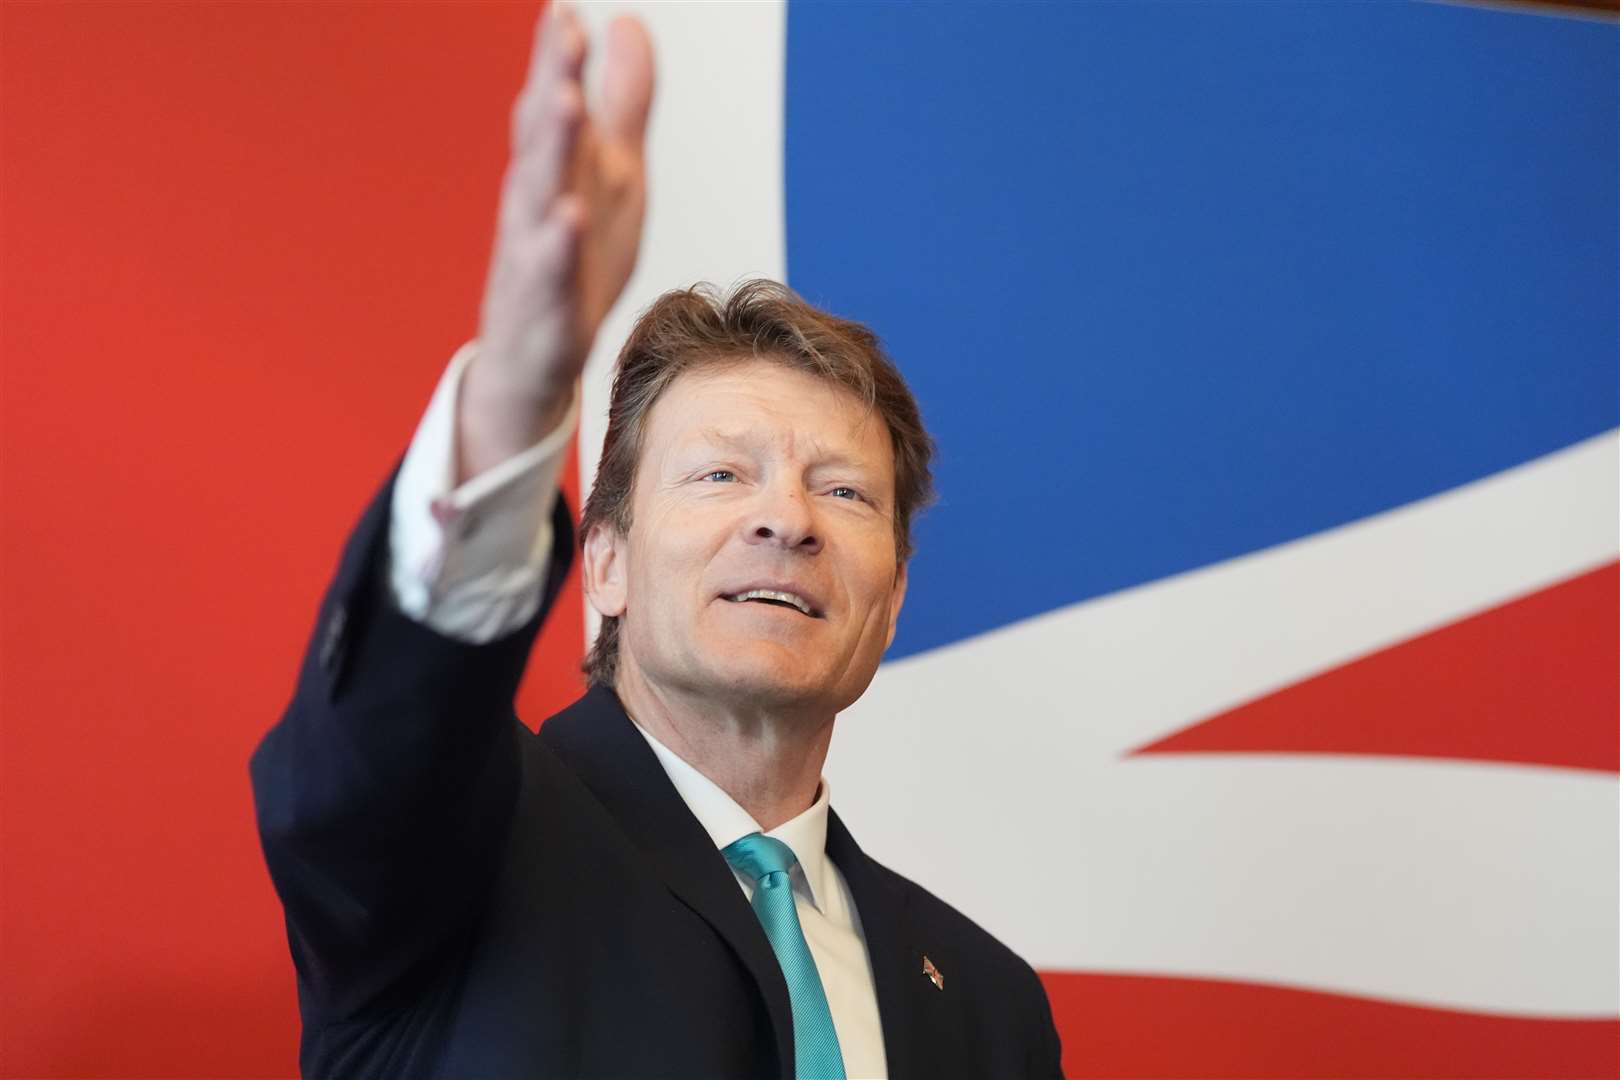 Reform UK is led by former Tory donor Richard Tice (Stefan Rousseau/PA)